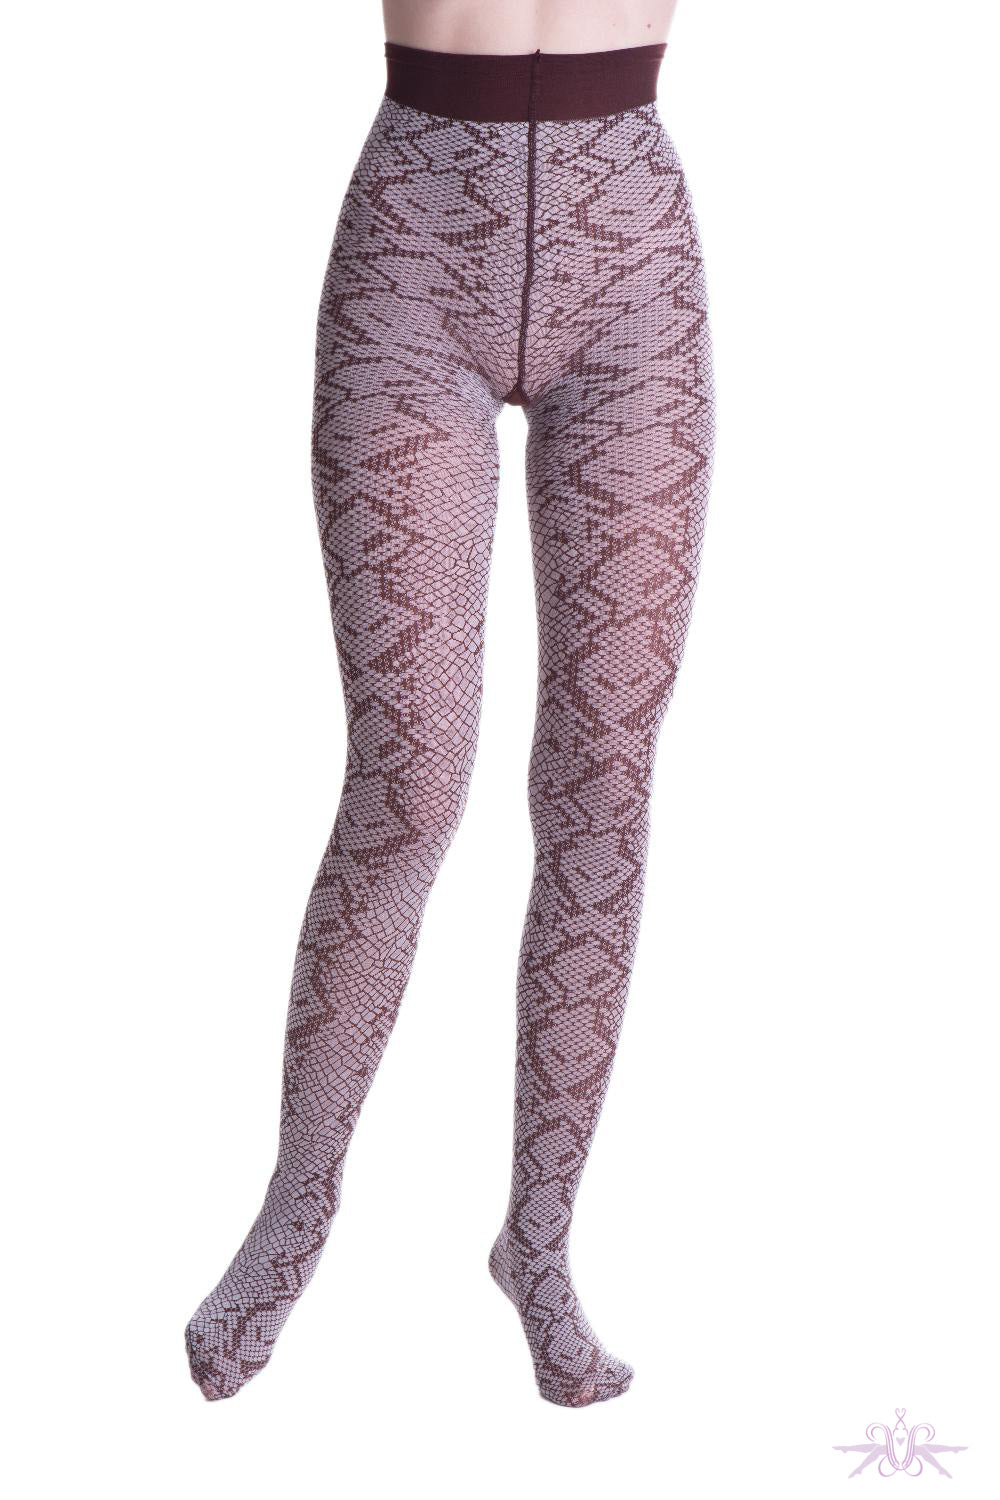 Trasparenze Oak Tree Tights In Stock At UK Tights